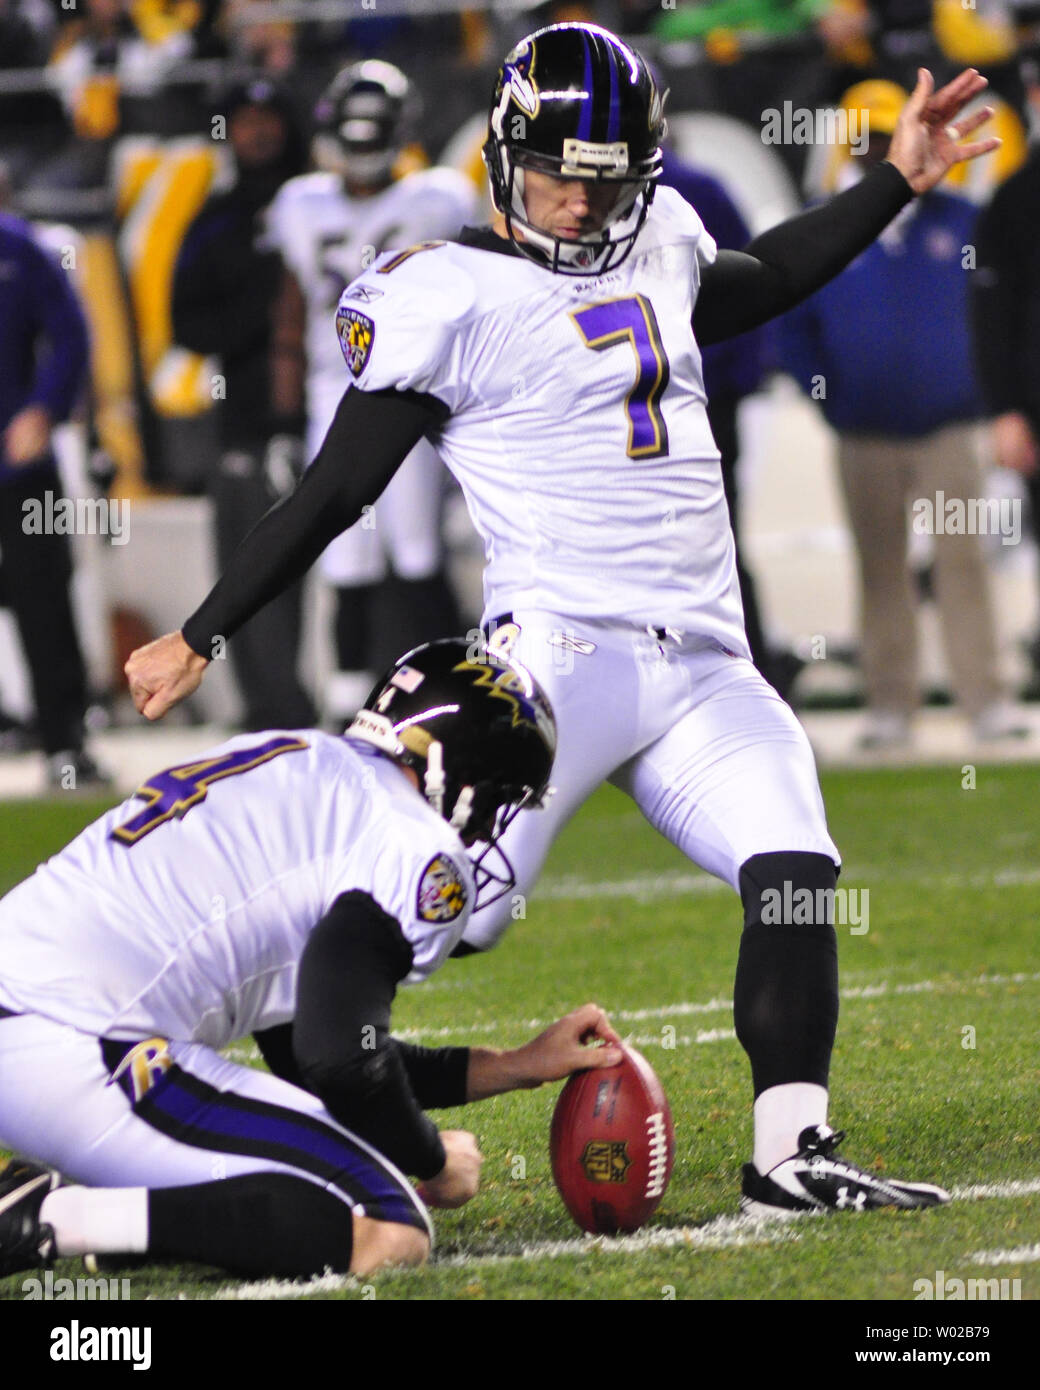 Baltimore Ravens kicker Billy Cundiff misses a 40 yard field goal against the Pittsburgh Steelers  at Heinz Field in Pittsburgh, Pennsylvania on November 6, 2011. The Ravens kicker totaled three fields to give the ravens the lead in the first half.    UPI/Archie Carpenter Stock Photo